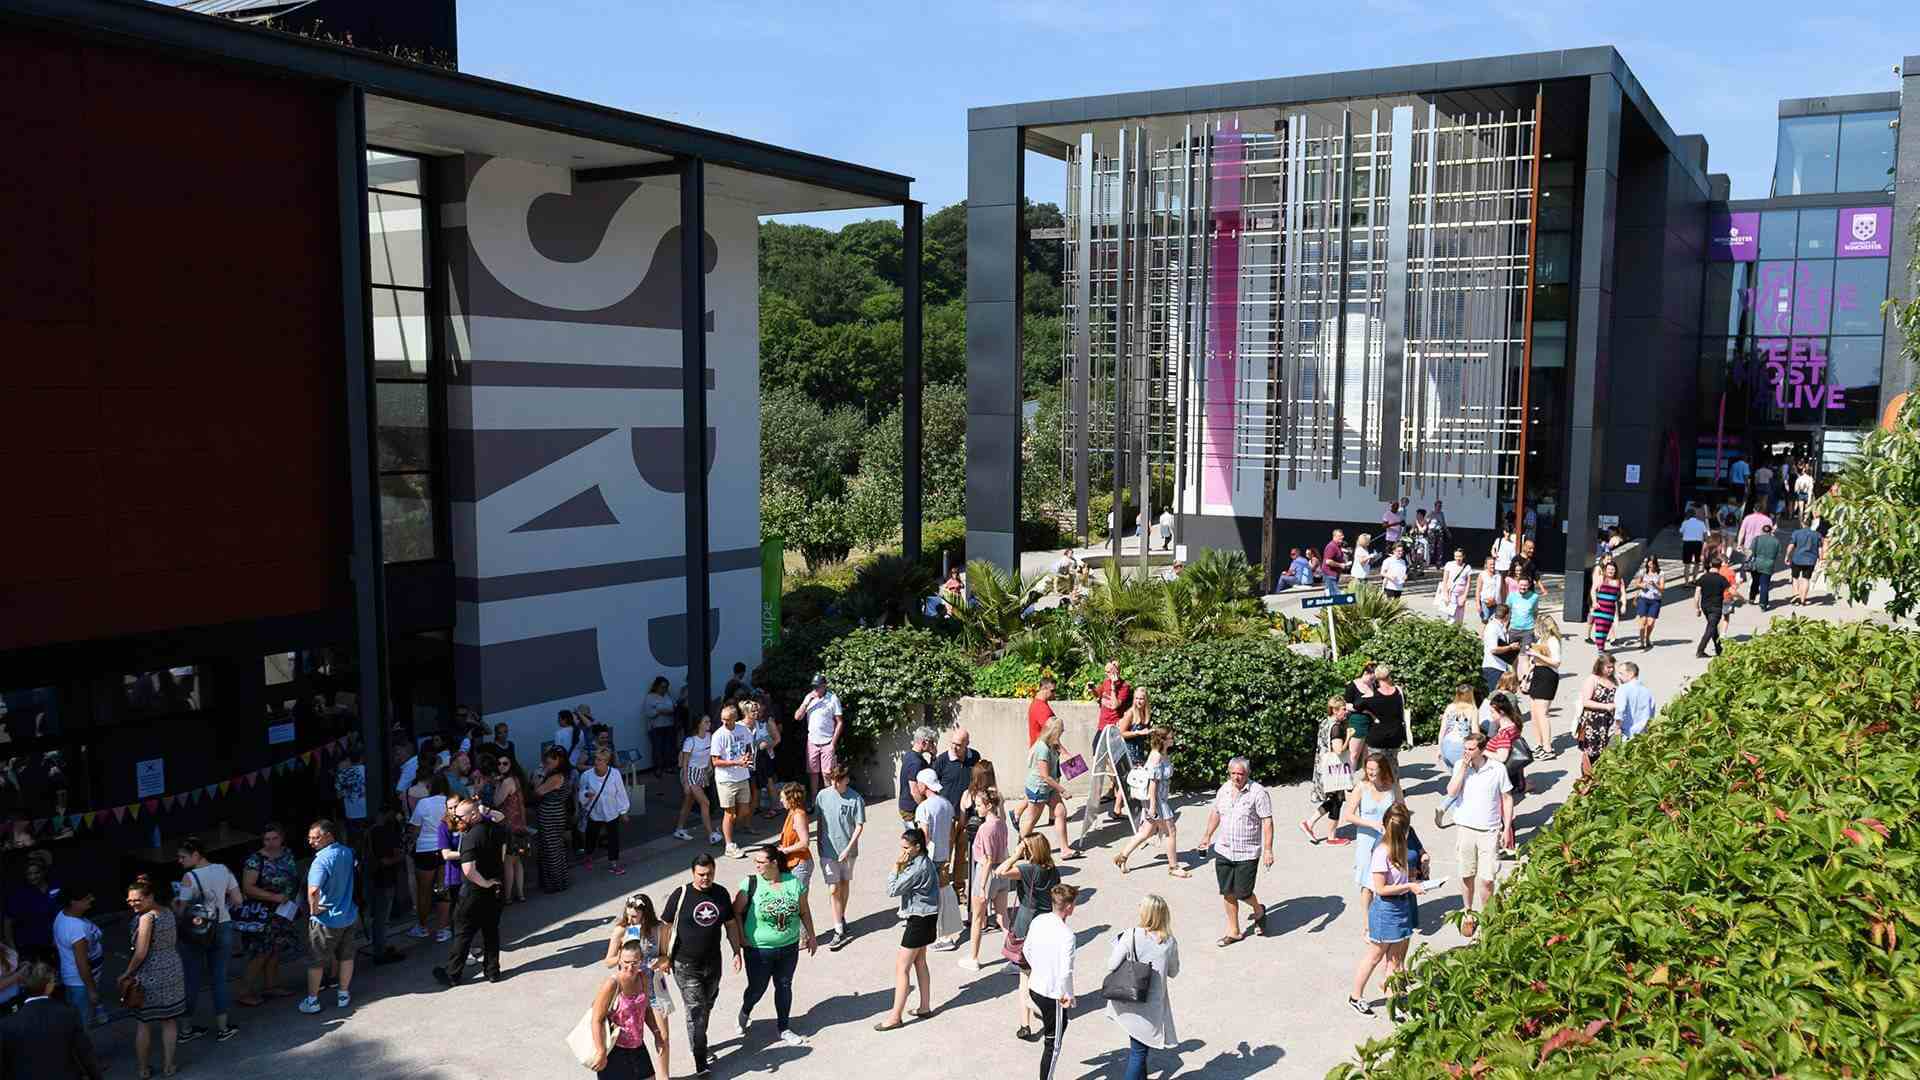 Image of University of Winchester